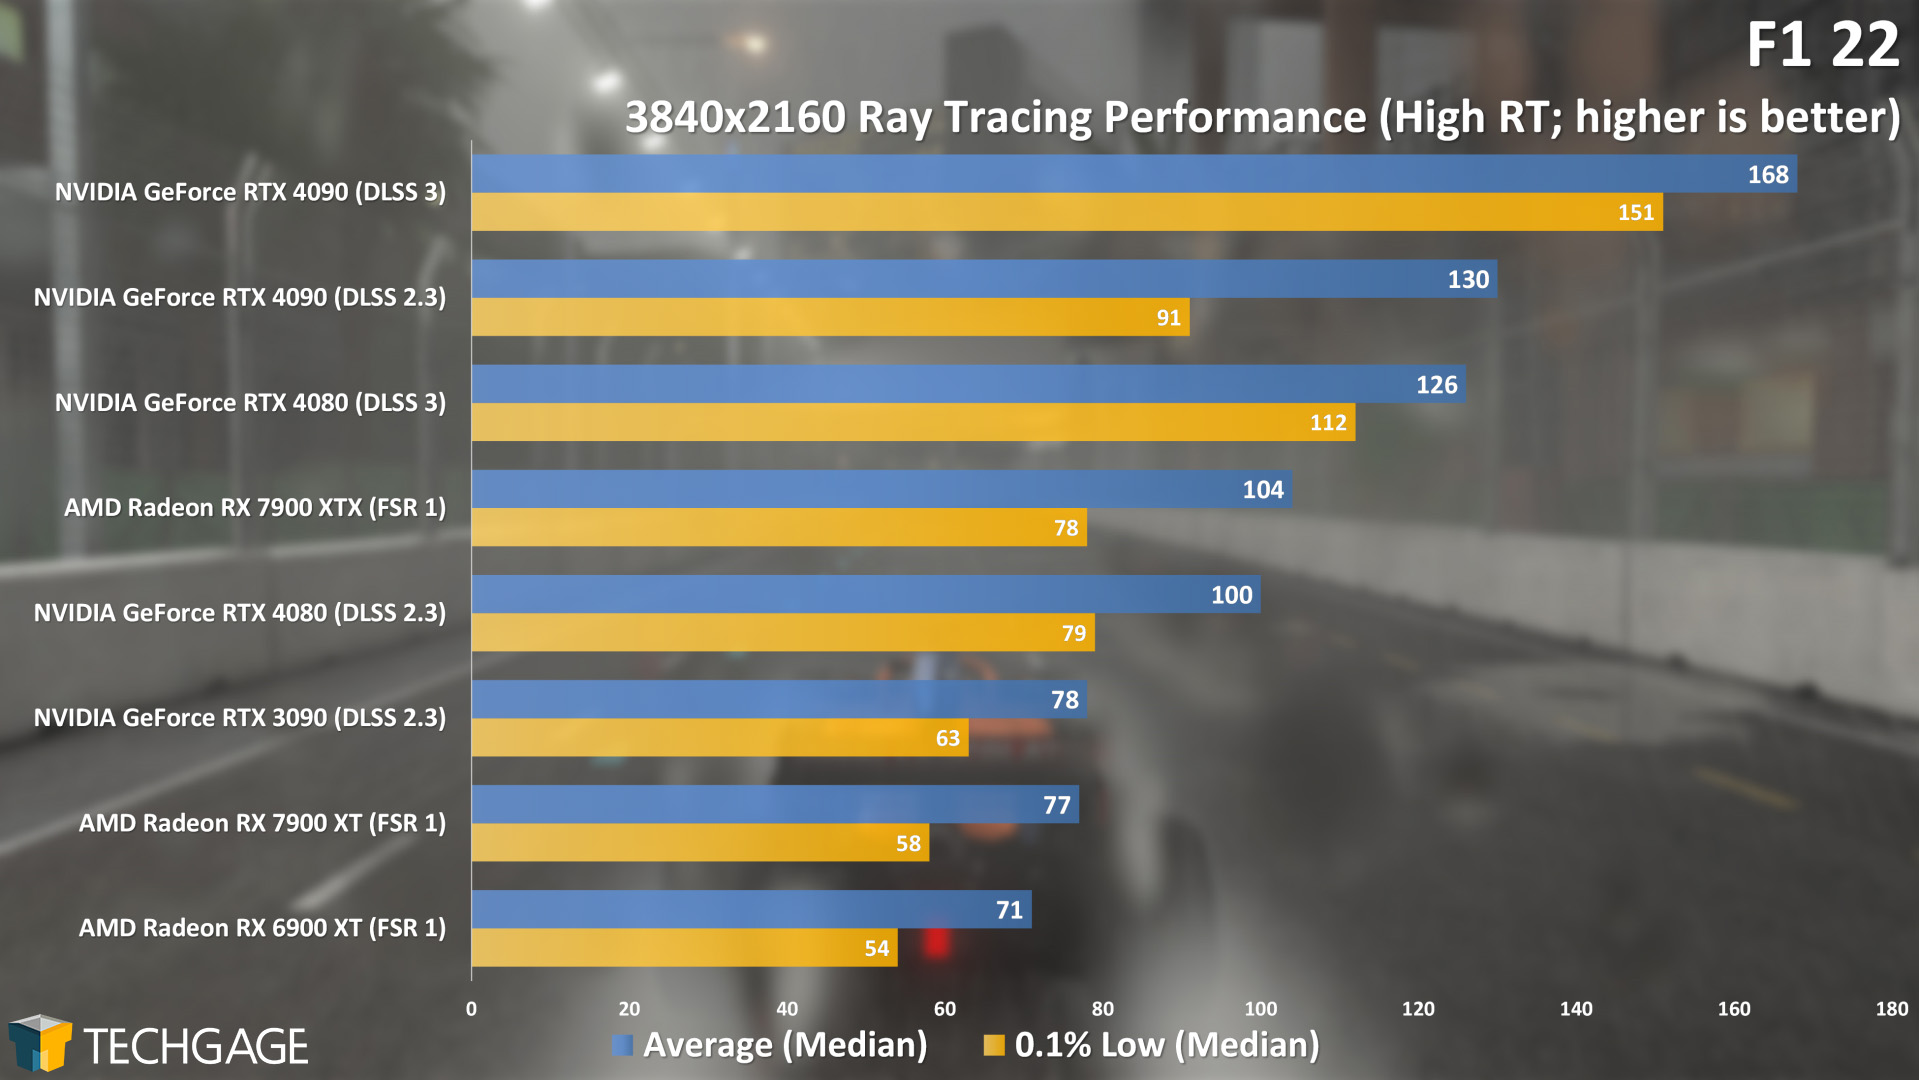 F1 22 4K Ray Tracing Performance (AMD Radeon RX 7900 XT and XTX).png